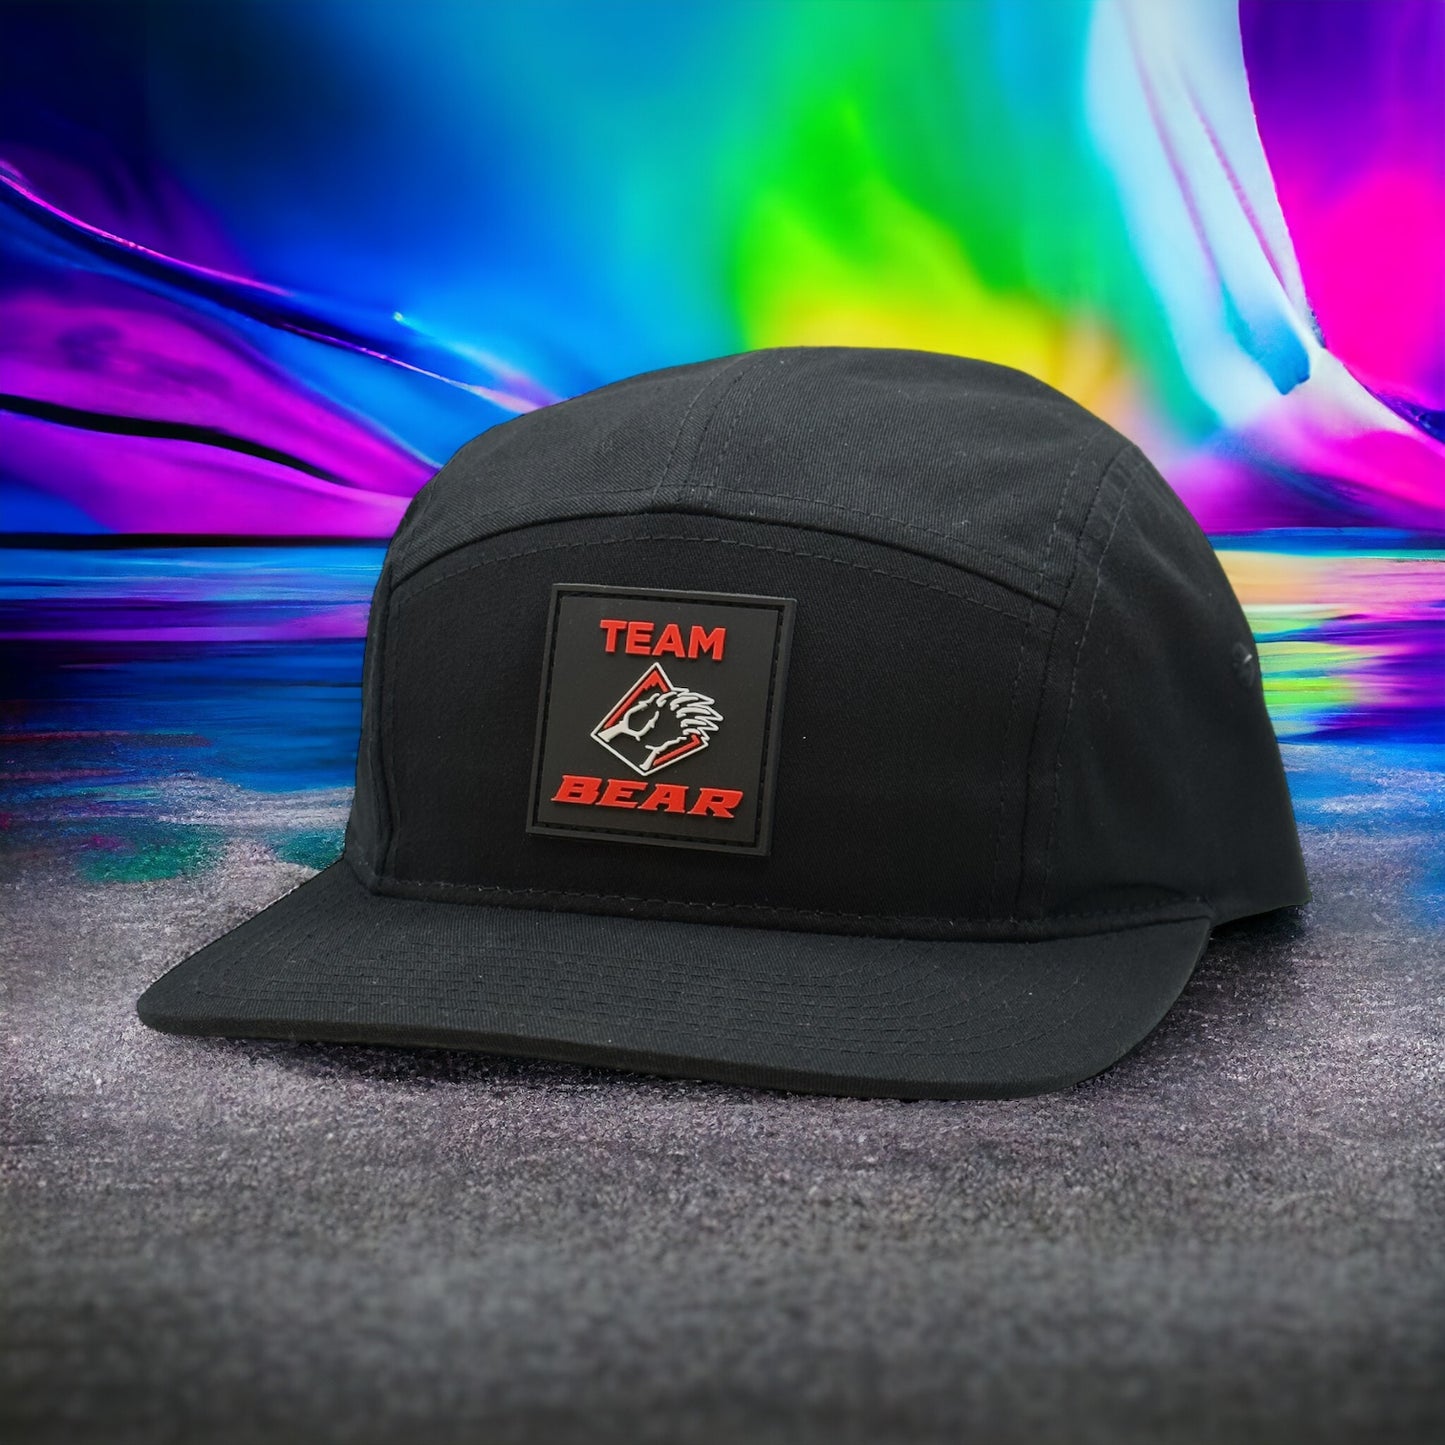 Black 5 panel team bear hat with rubber patch logo